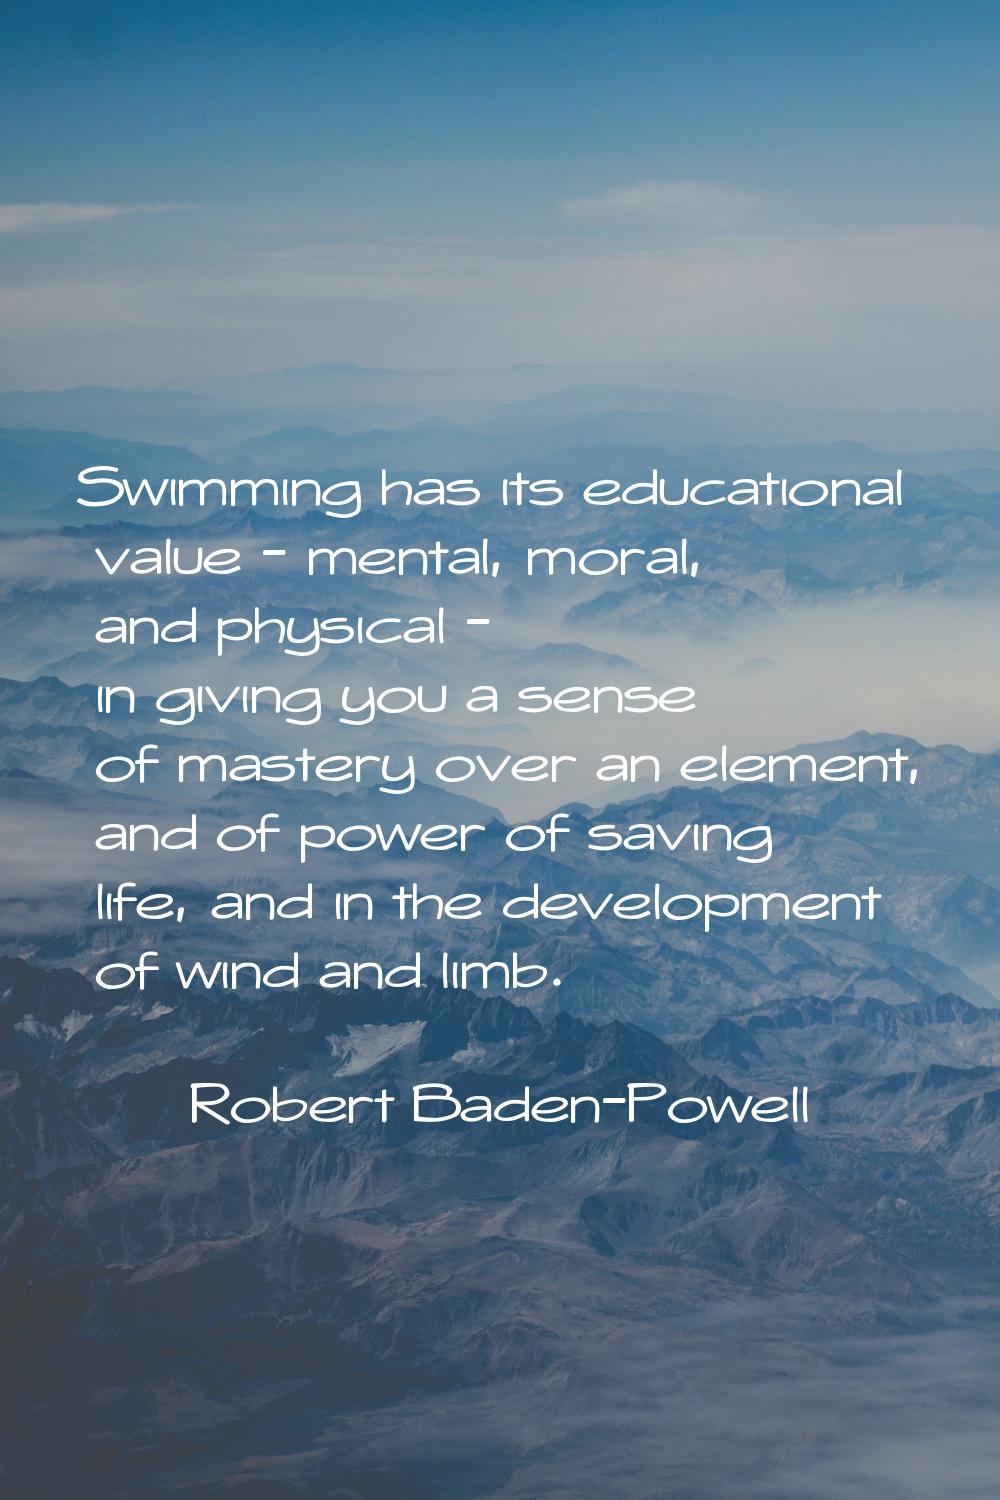 Swimming has its educational value - mental, moral, and physical - in giving you a sense of mastery